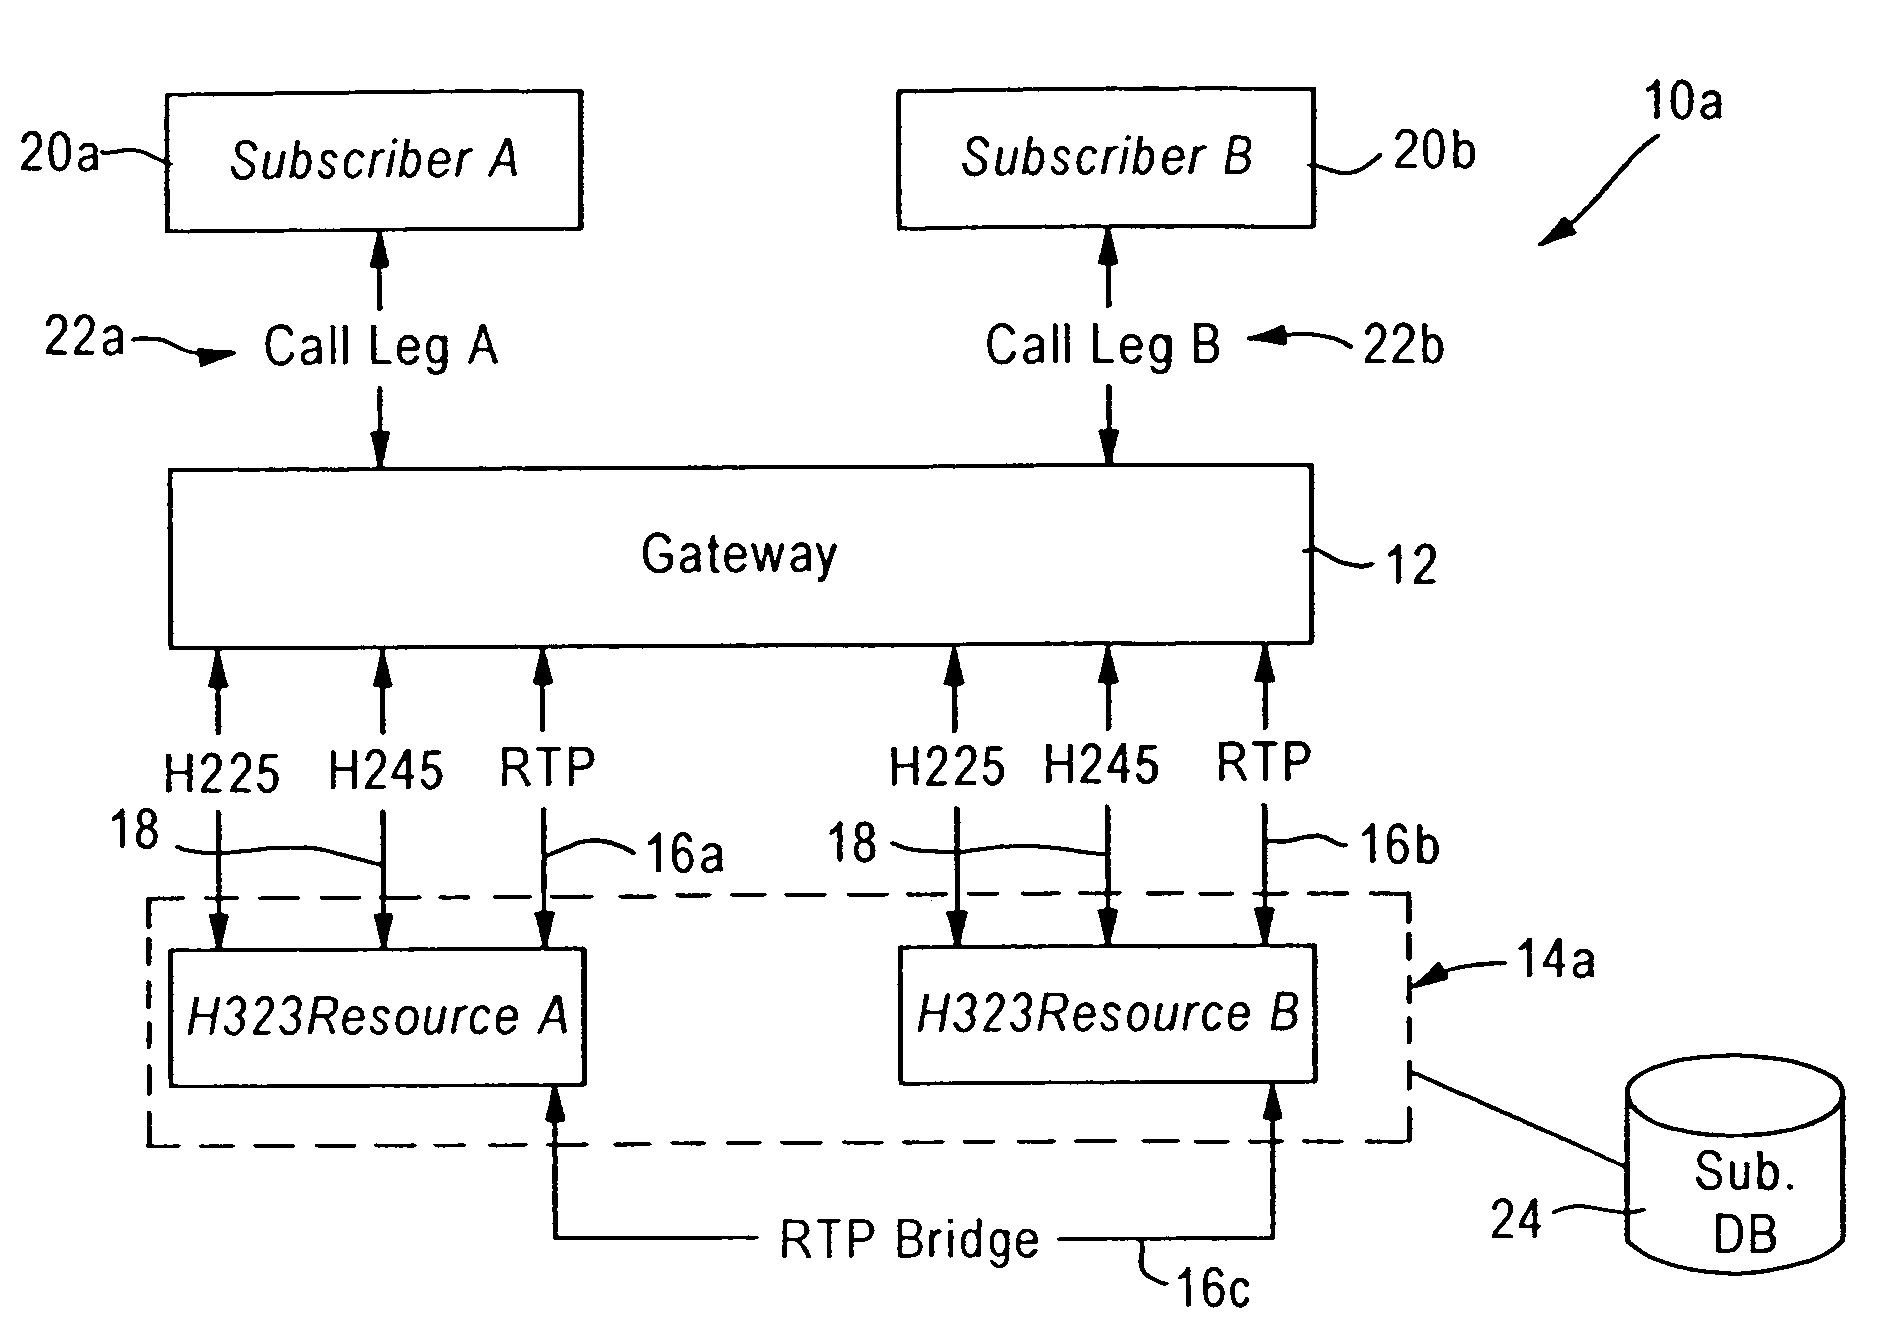 Scalable voice over IP system providing independent call bridging for outbound calls initiated by user interface applications